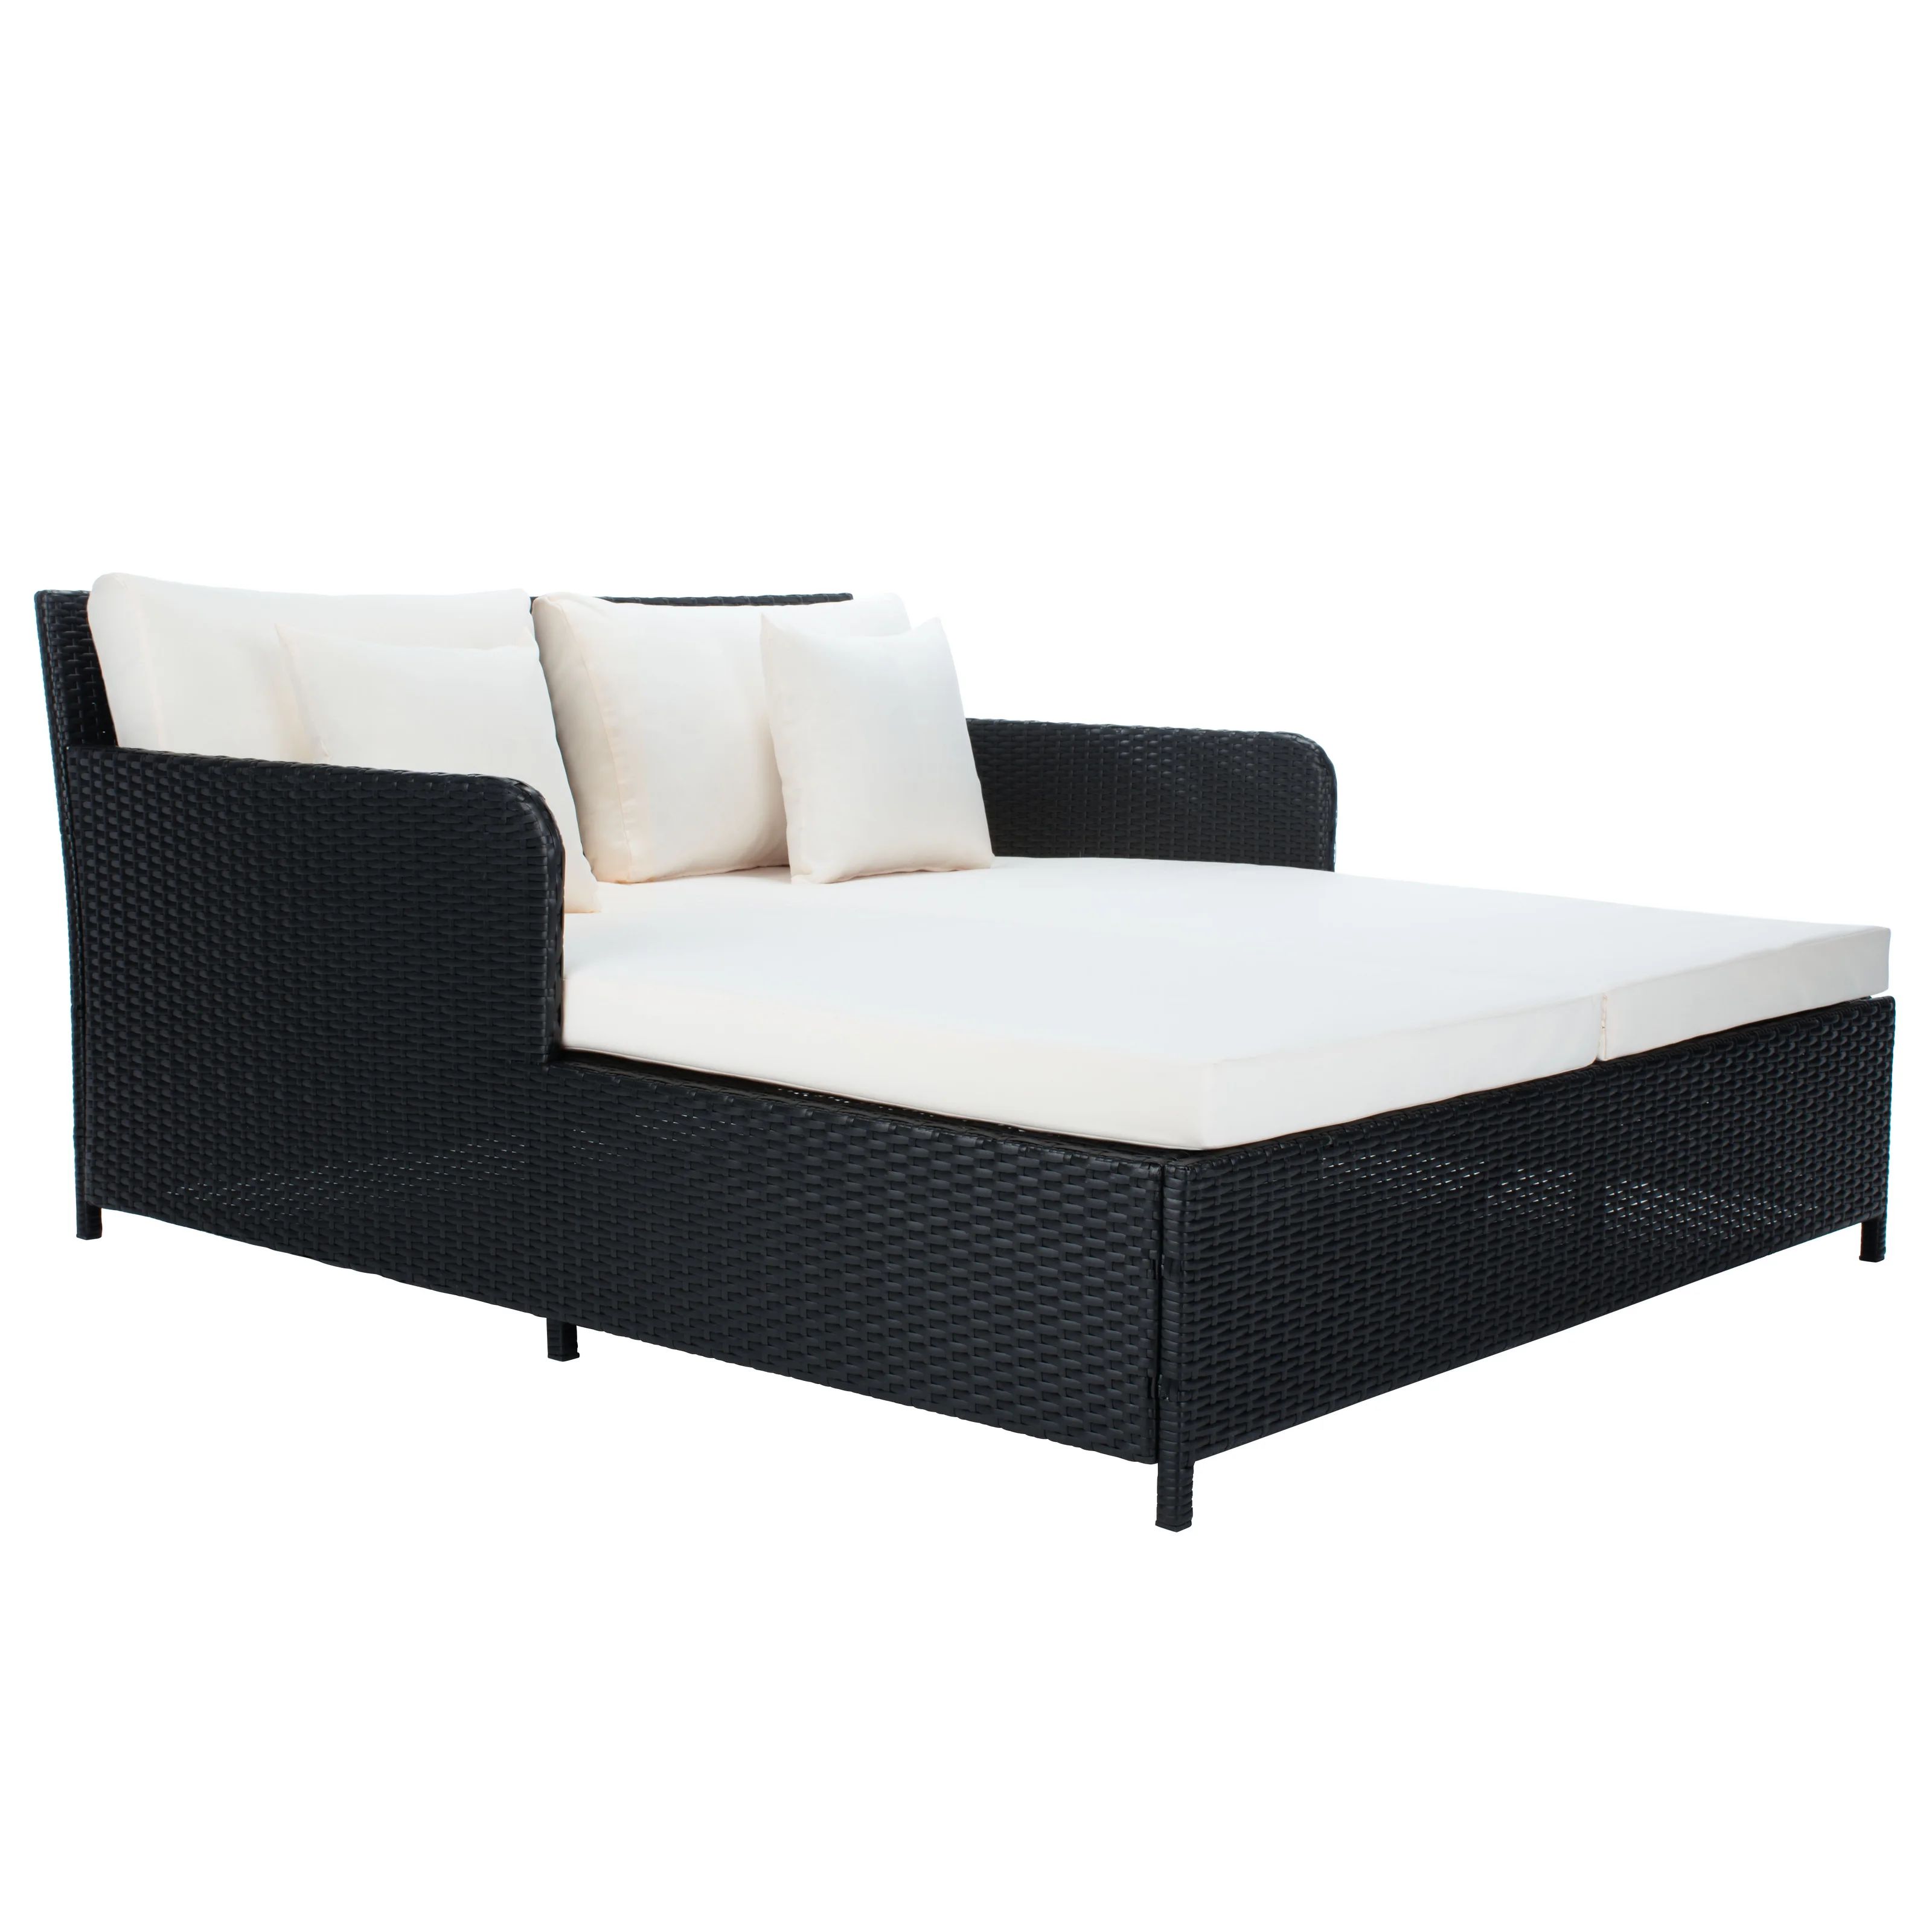 Cadeo Upholstered Rattan Daybed | Wayfair North America